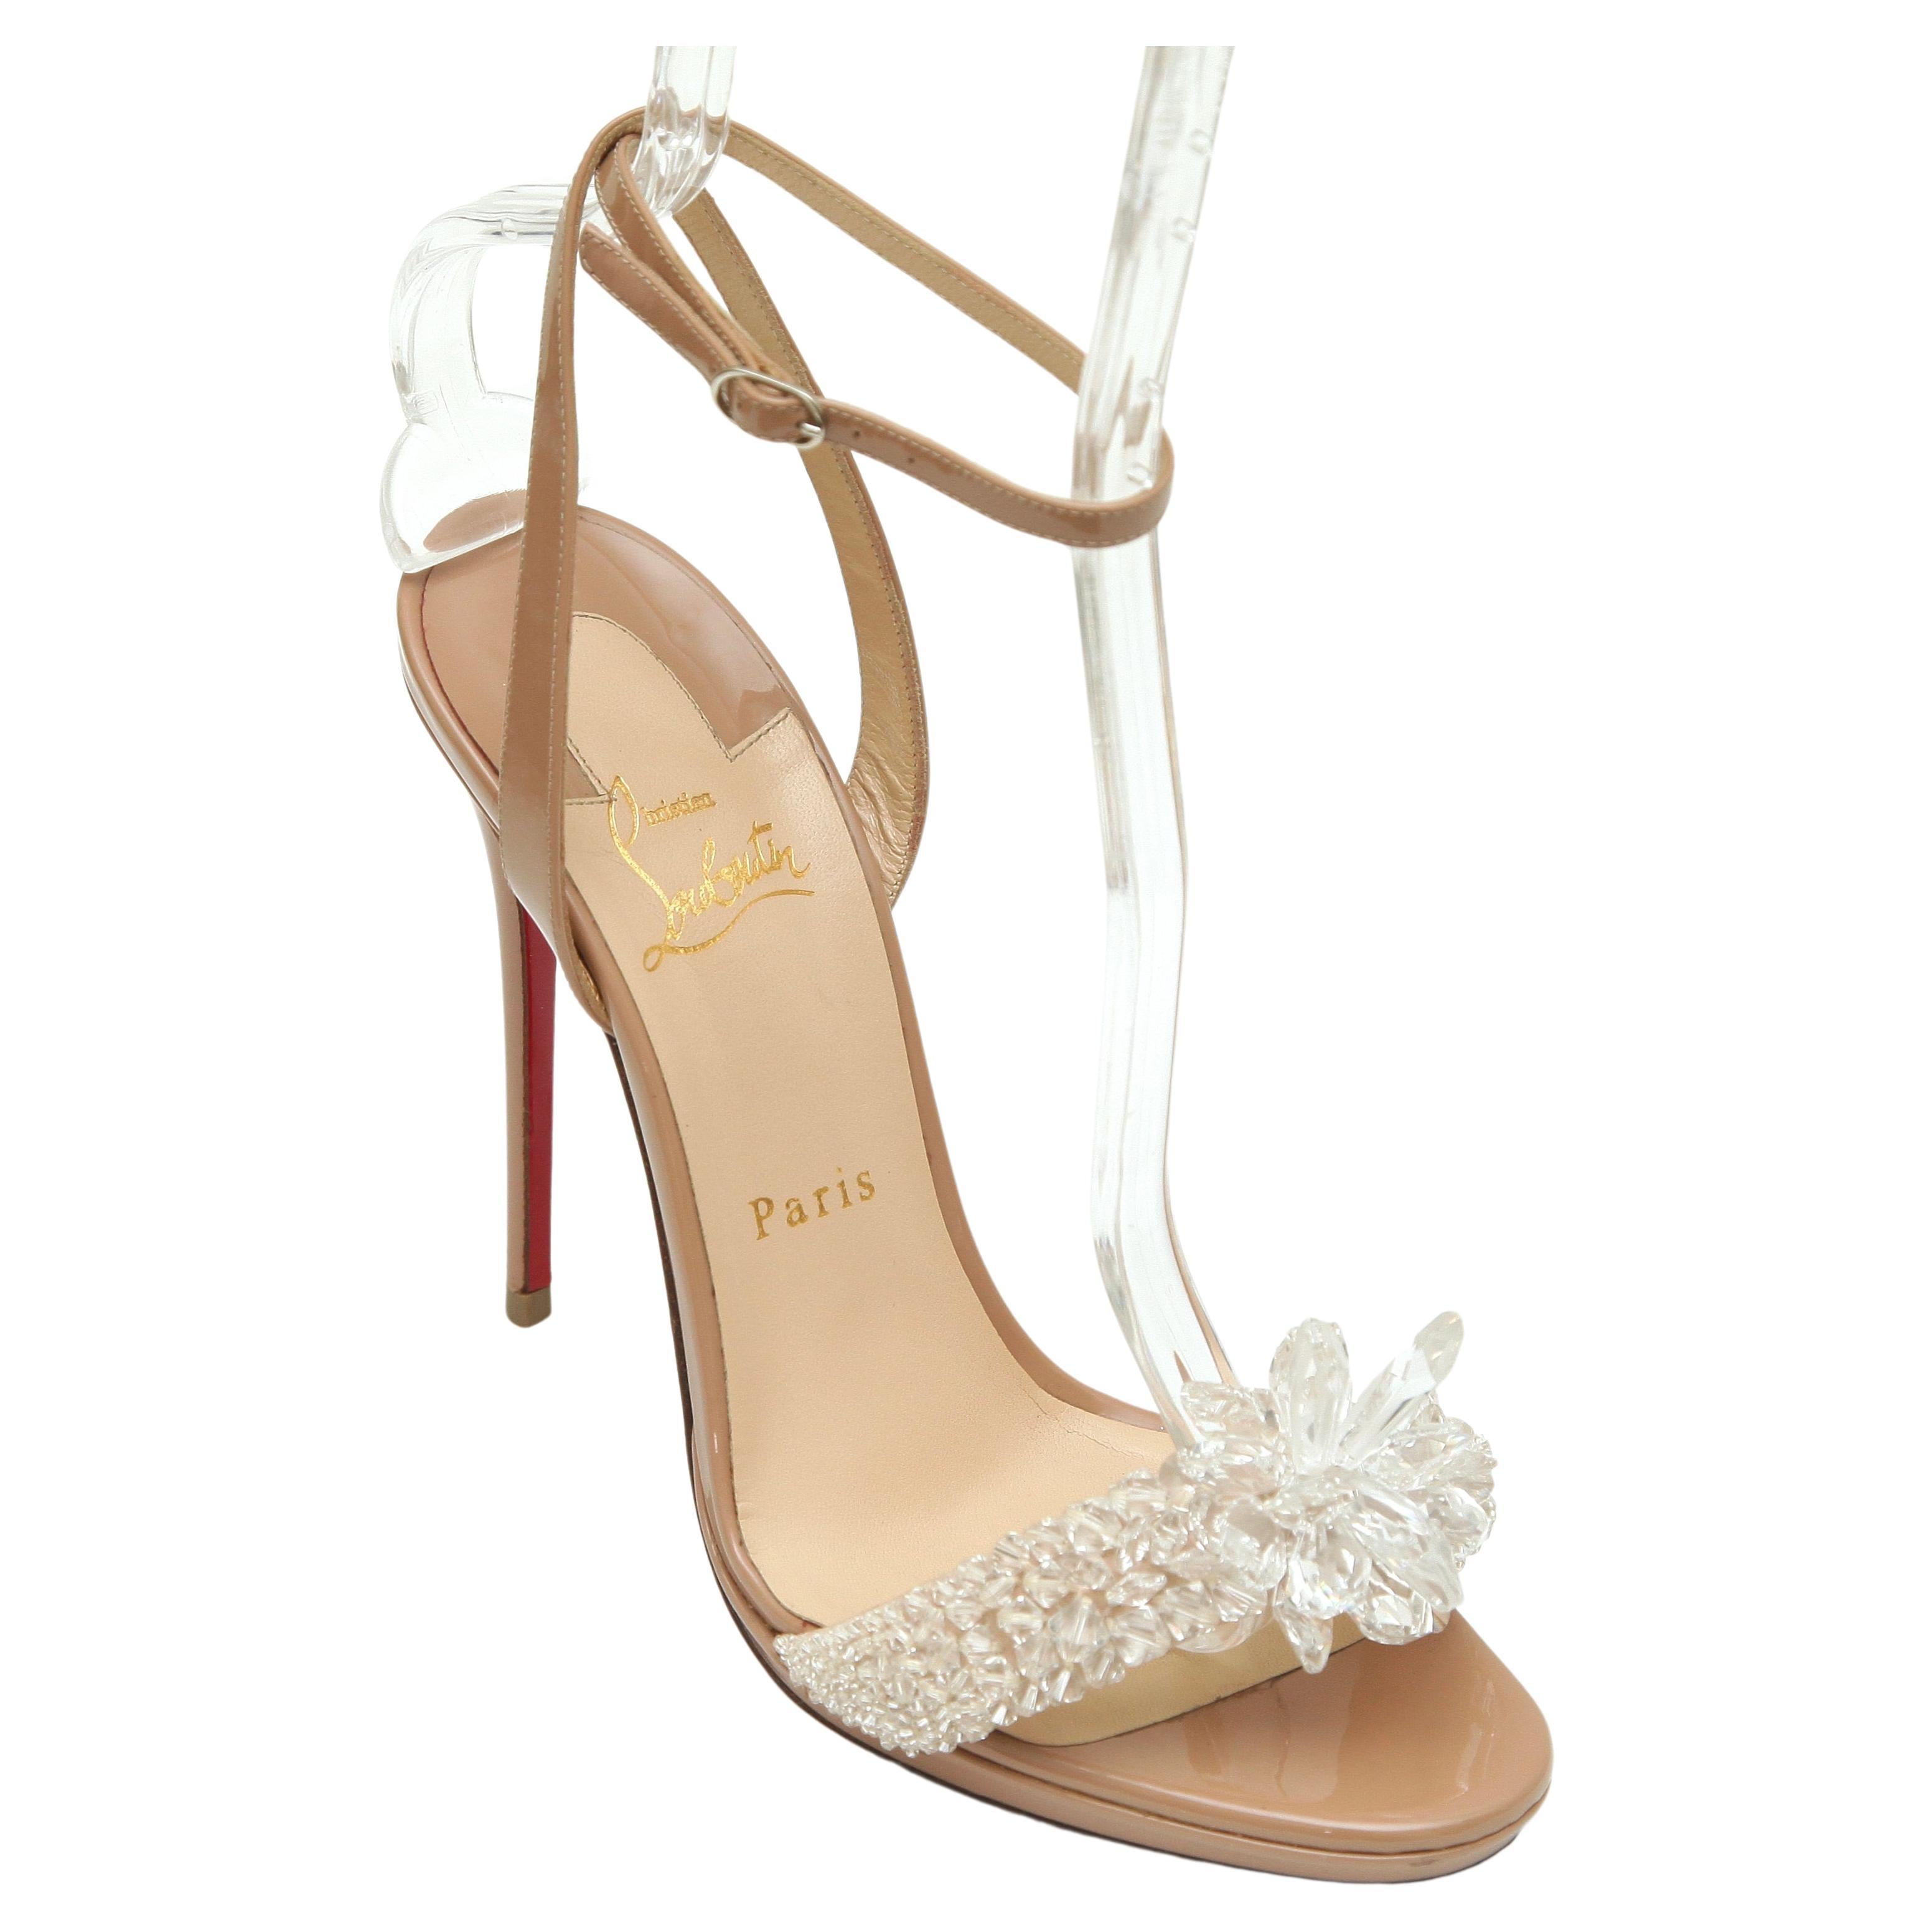 CHRISTIAN LOUBOUTIN Patent Leather Sandal CRYSTAL QUEEN Heel Ankle Strap 39 For Sale